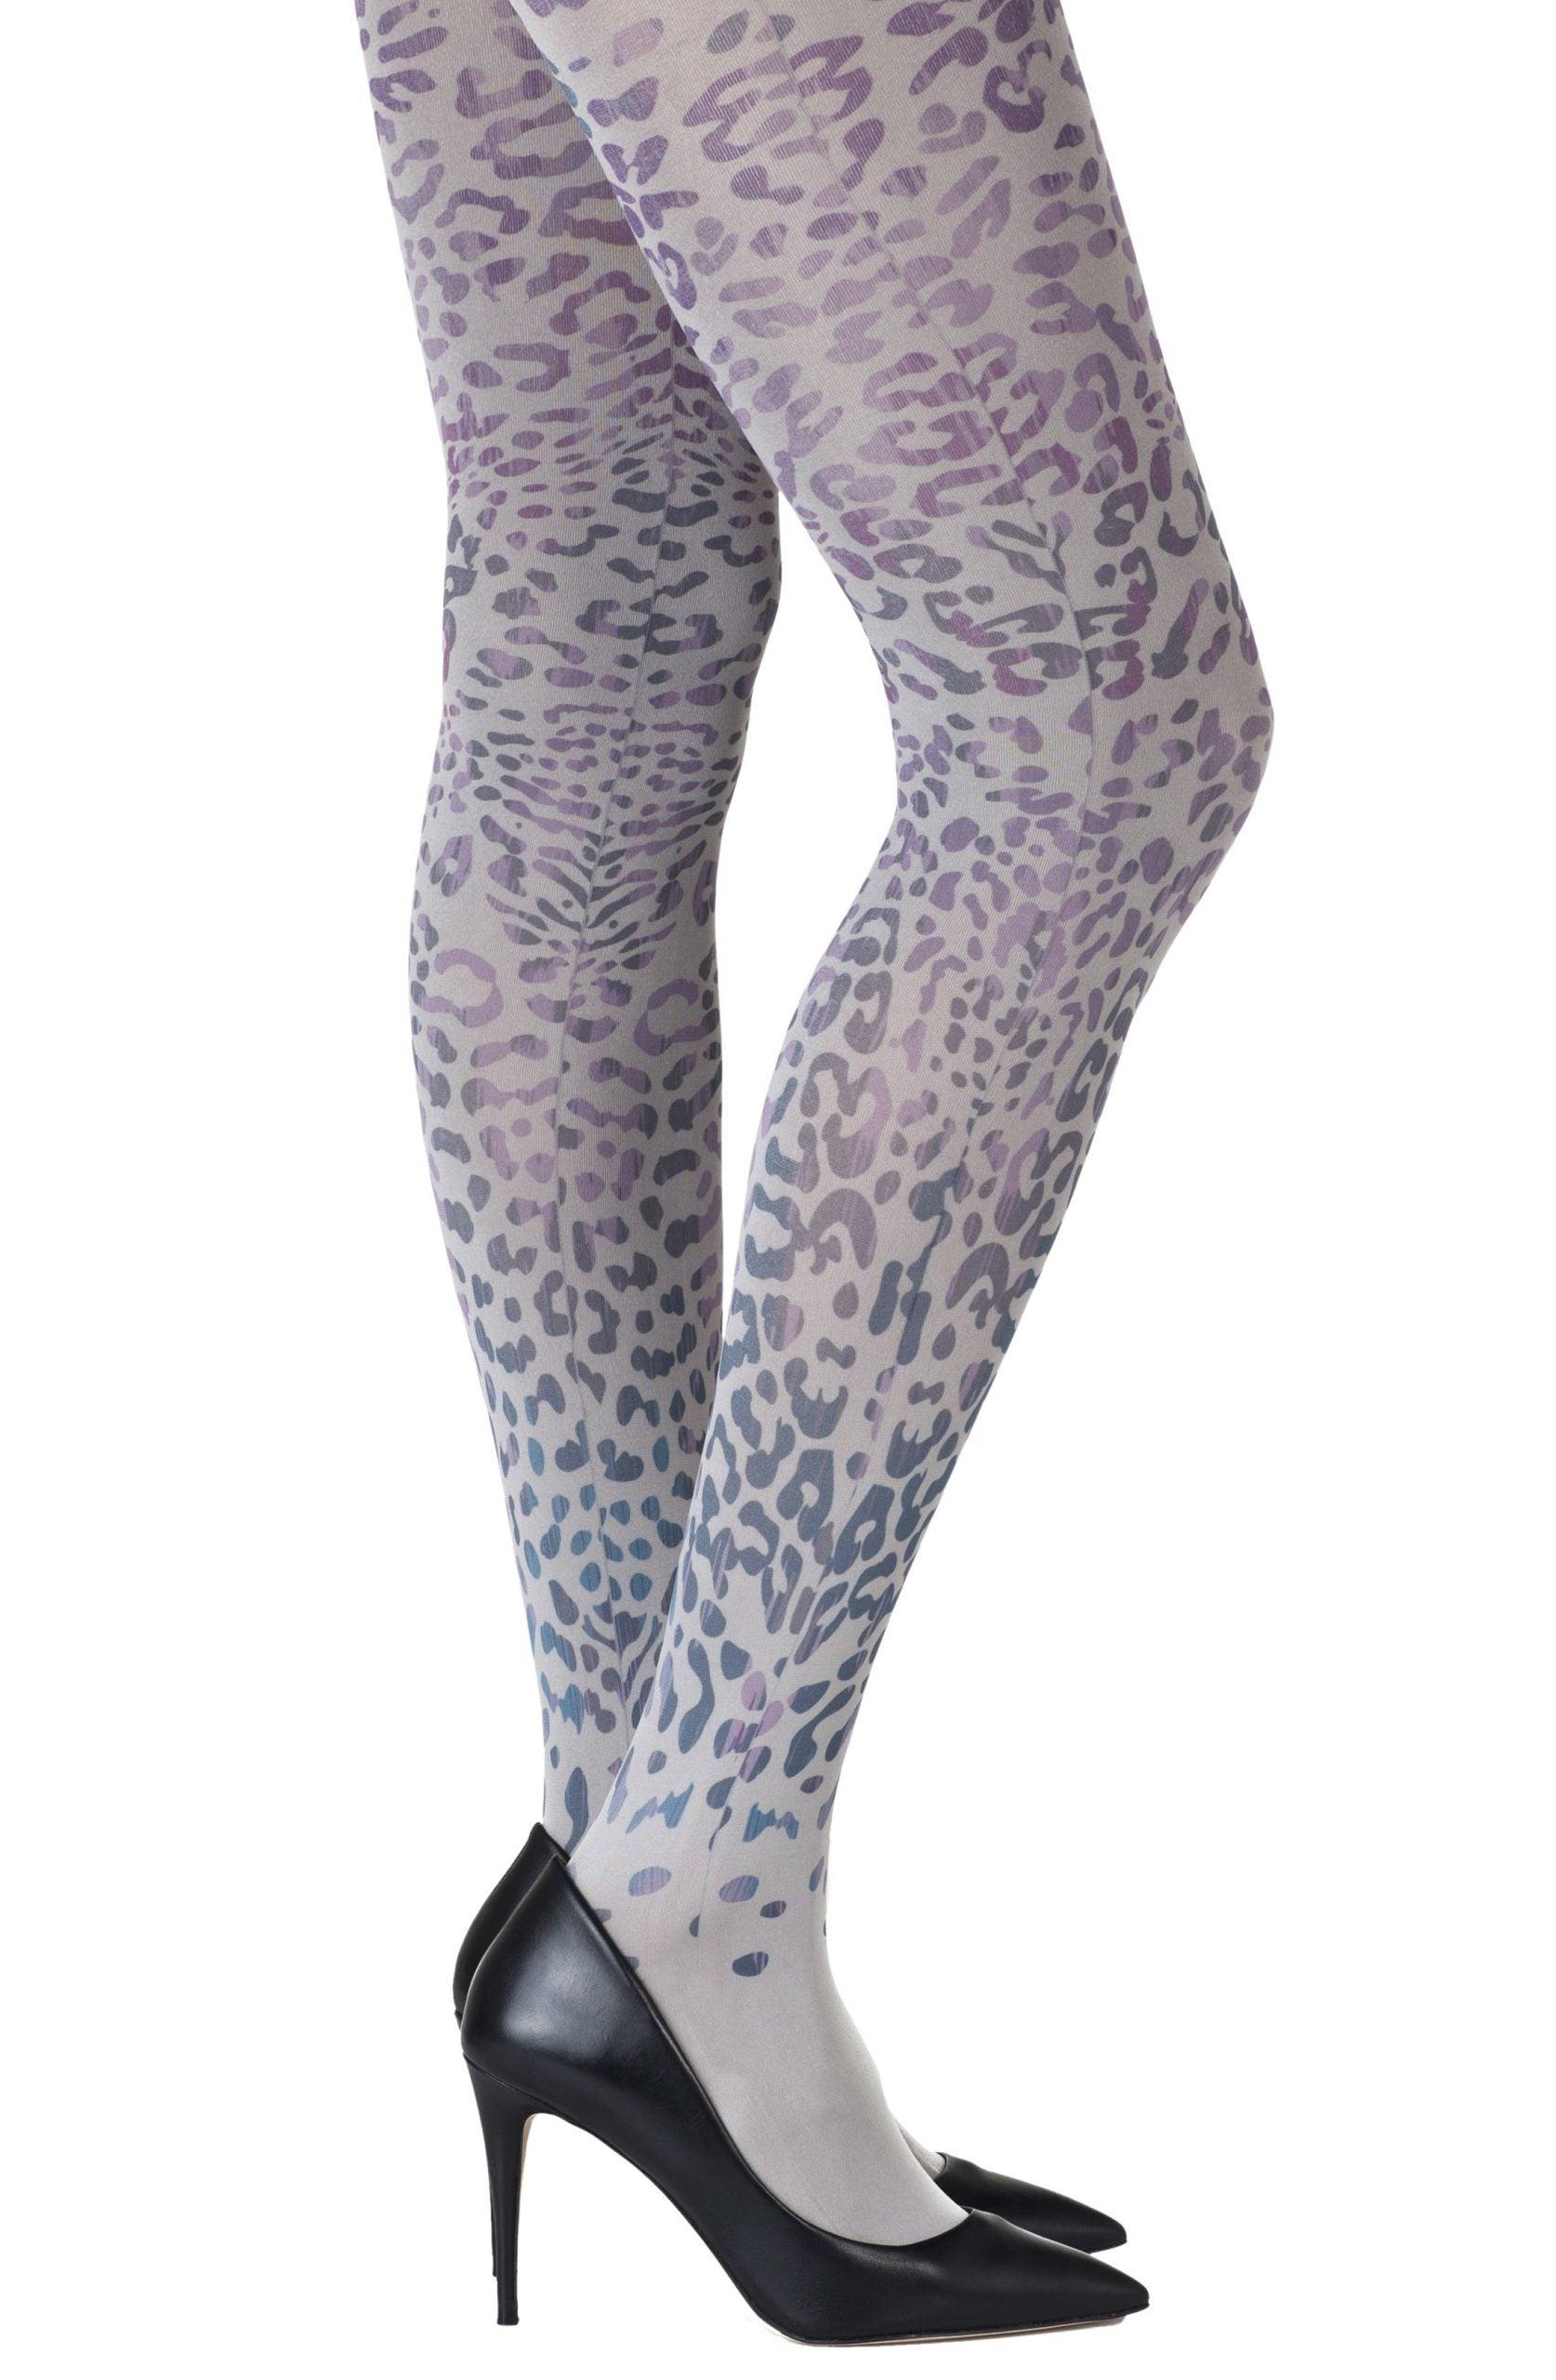 Zohara "You're An Animal" Grey Tights - Sydney Rose Lingerie 